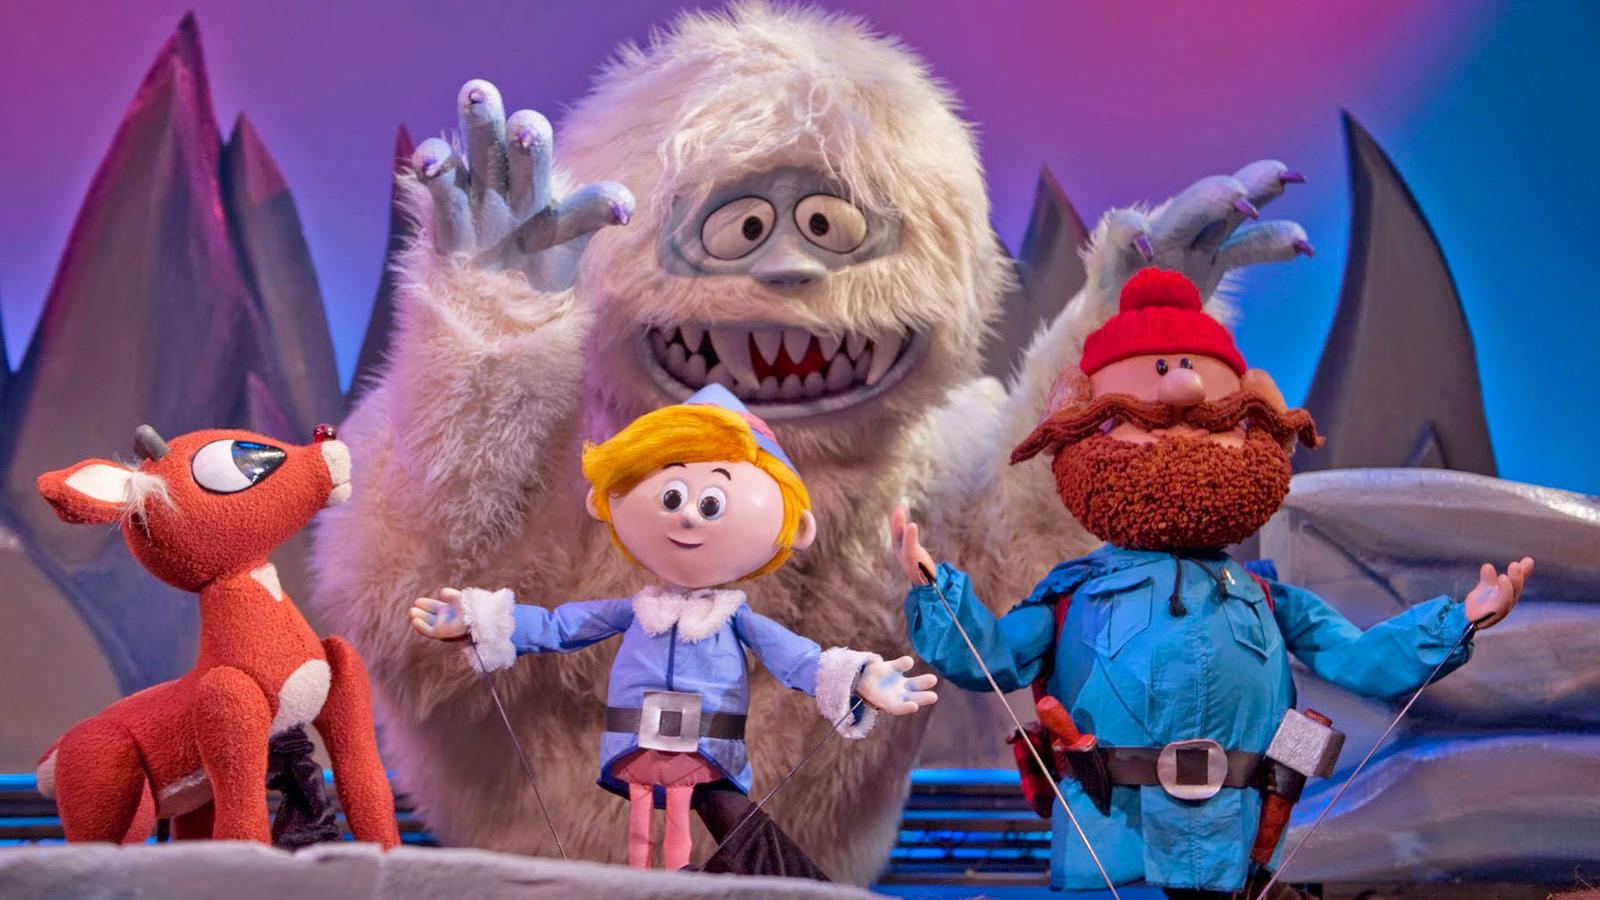 Rudolph The Red Nosed Reindeer' Flying Back Into Puppetry Center